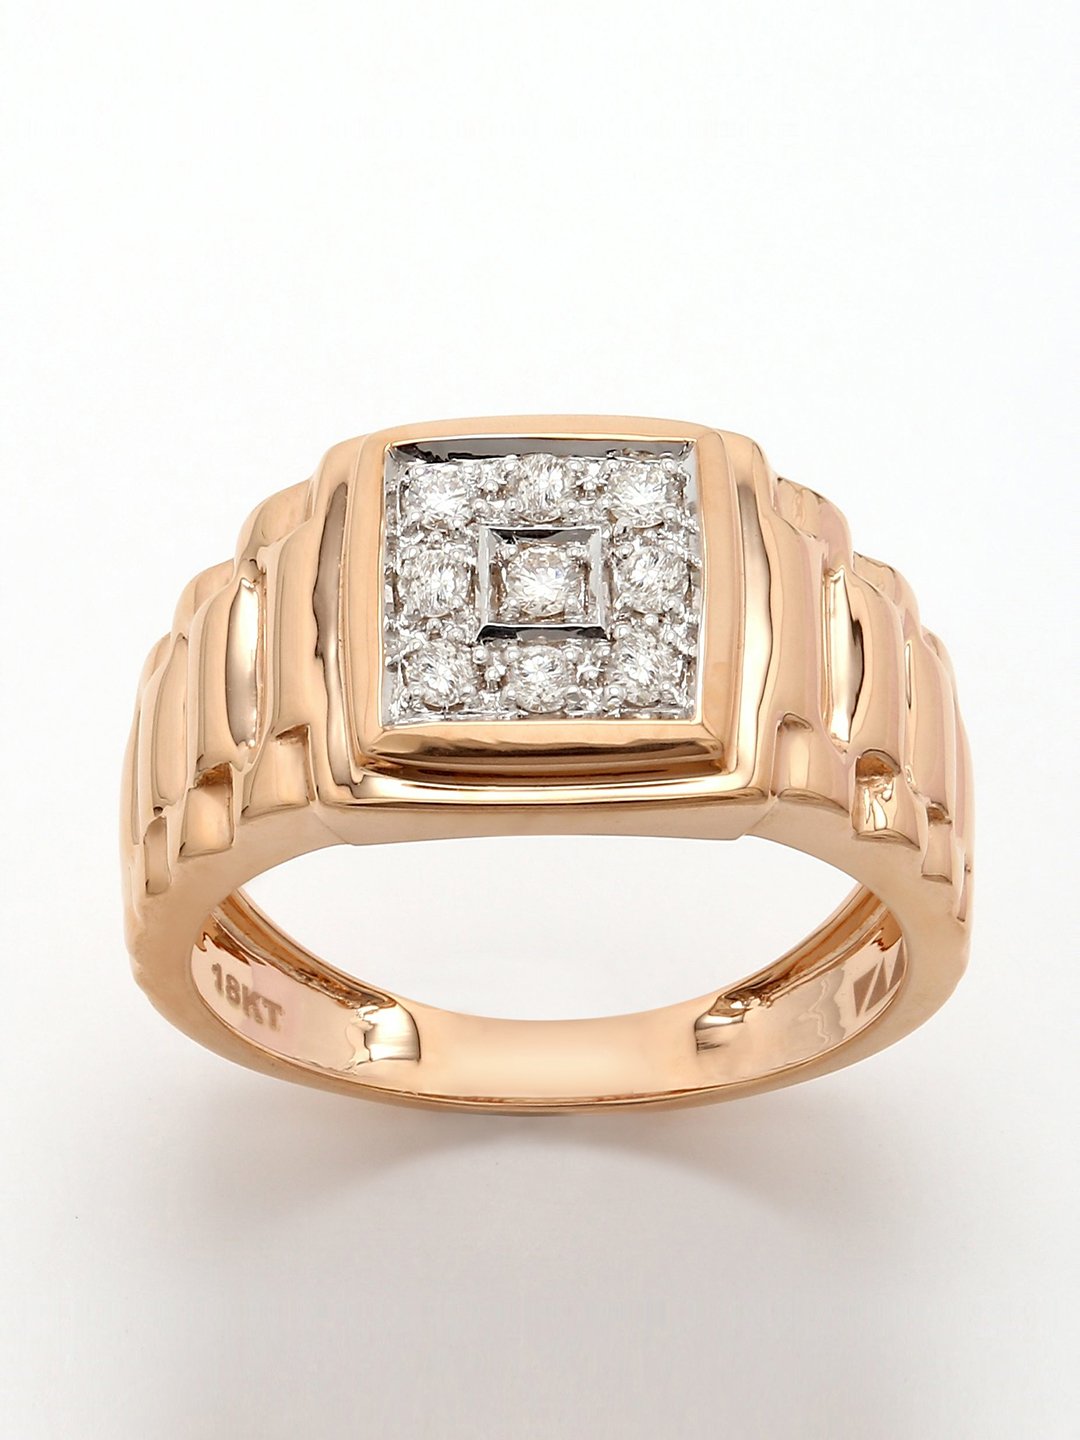 Real Diamond Mens Two Tone Ring - Zest Mélange 